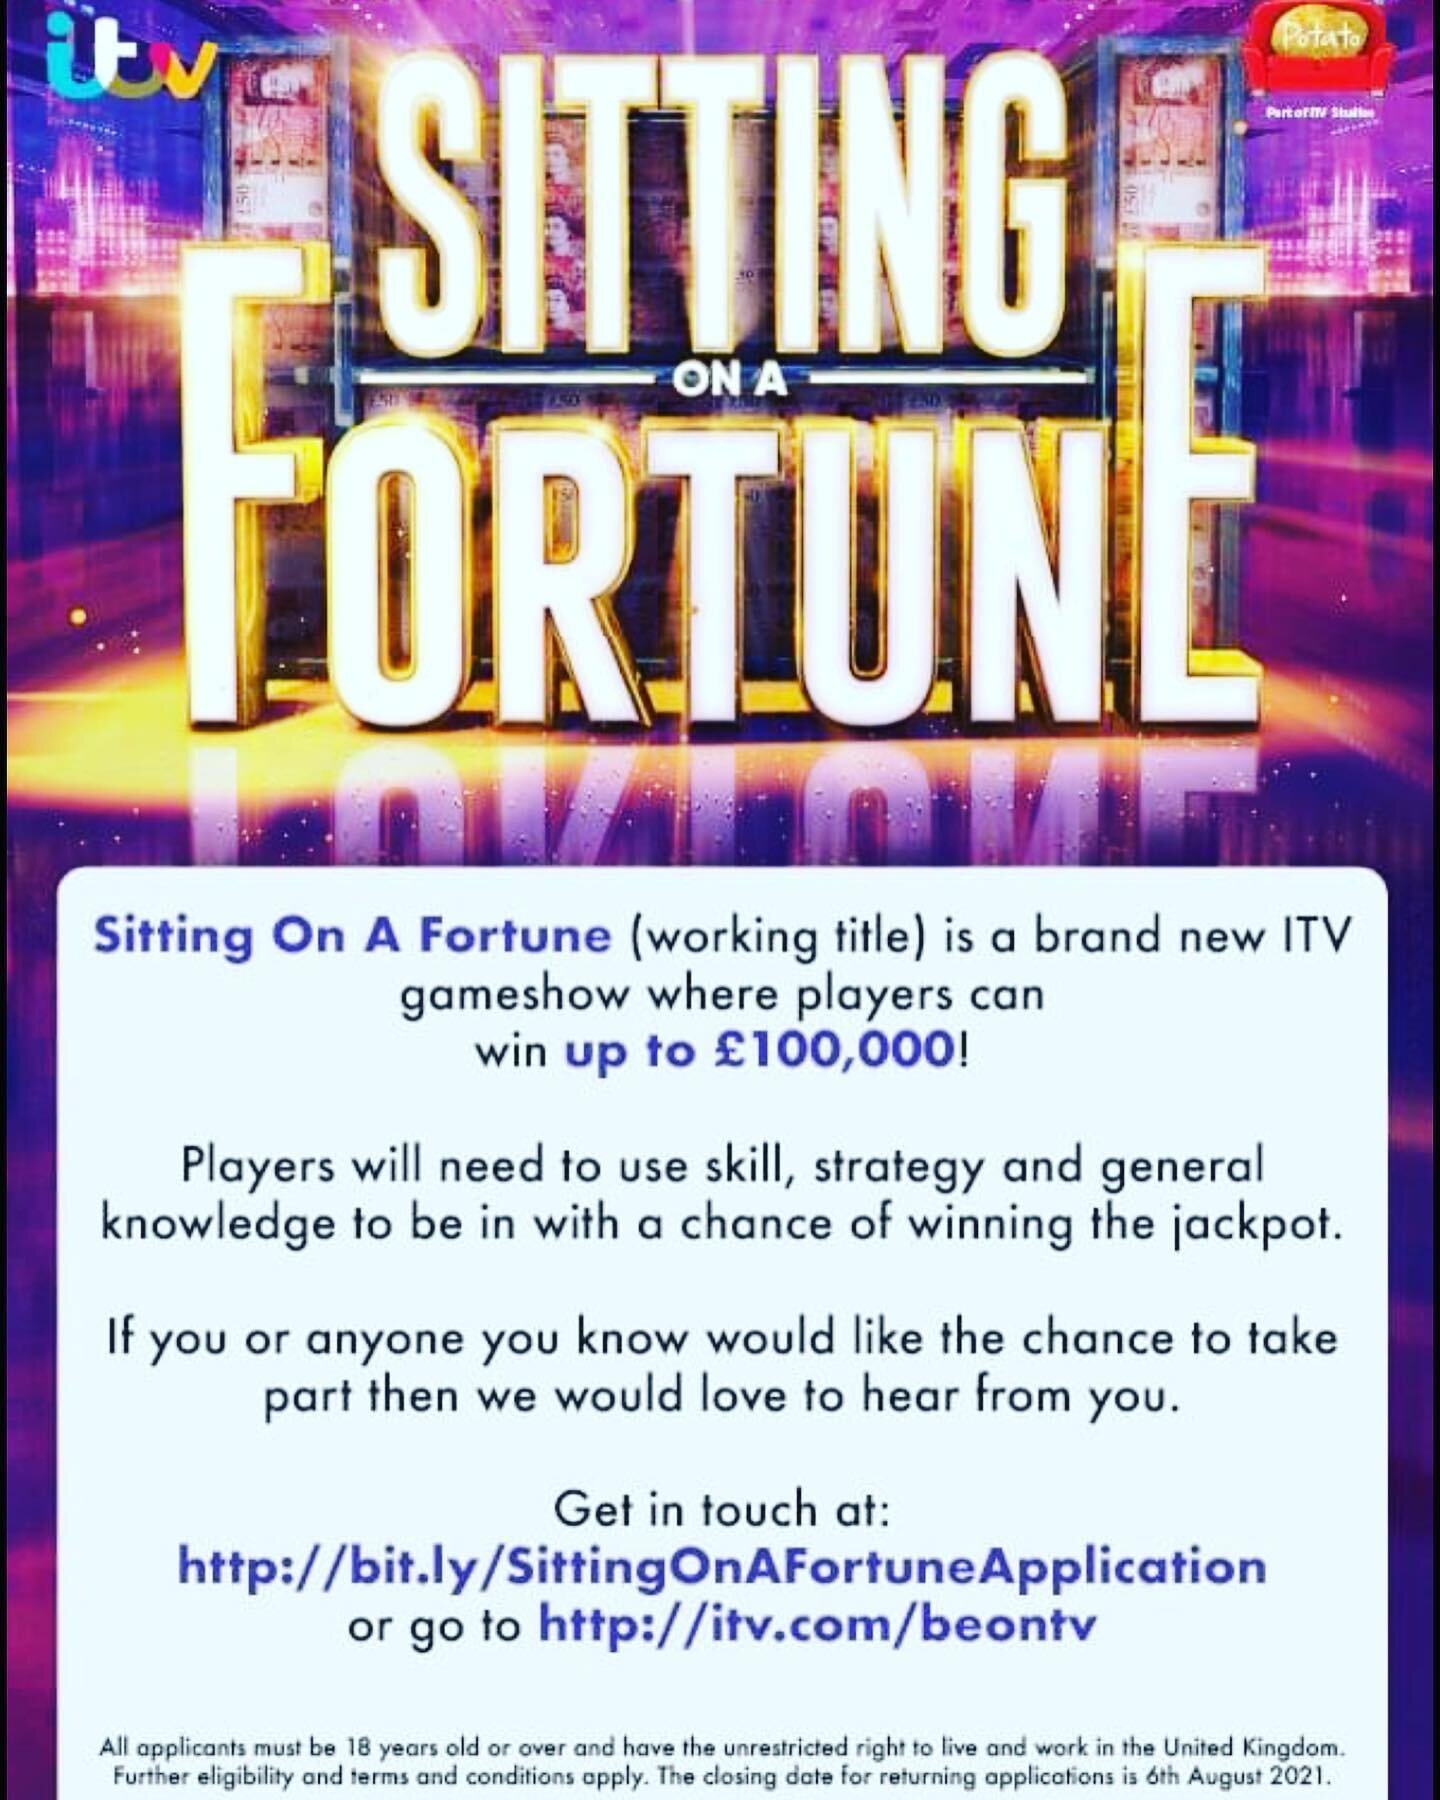 ** UK - TV CASTING **

--------
Casting now for a brand new ITV prime time gameshow! For your chance to win up to &pound;100k - apply here!
https://itv.etribez.com/ag/itvp2/soaf/welcome.html

*
*
*
*
*
*
*
*
*
*
*
*
*
*
*
*
*
*
*
*
#UK #casting #tvca